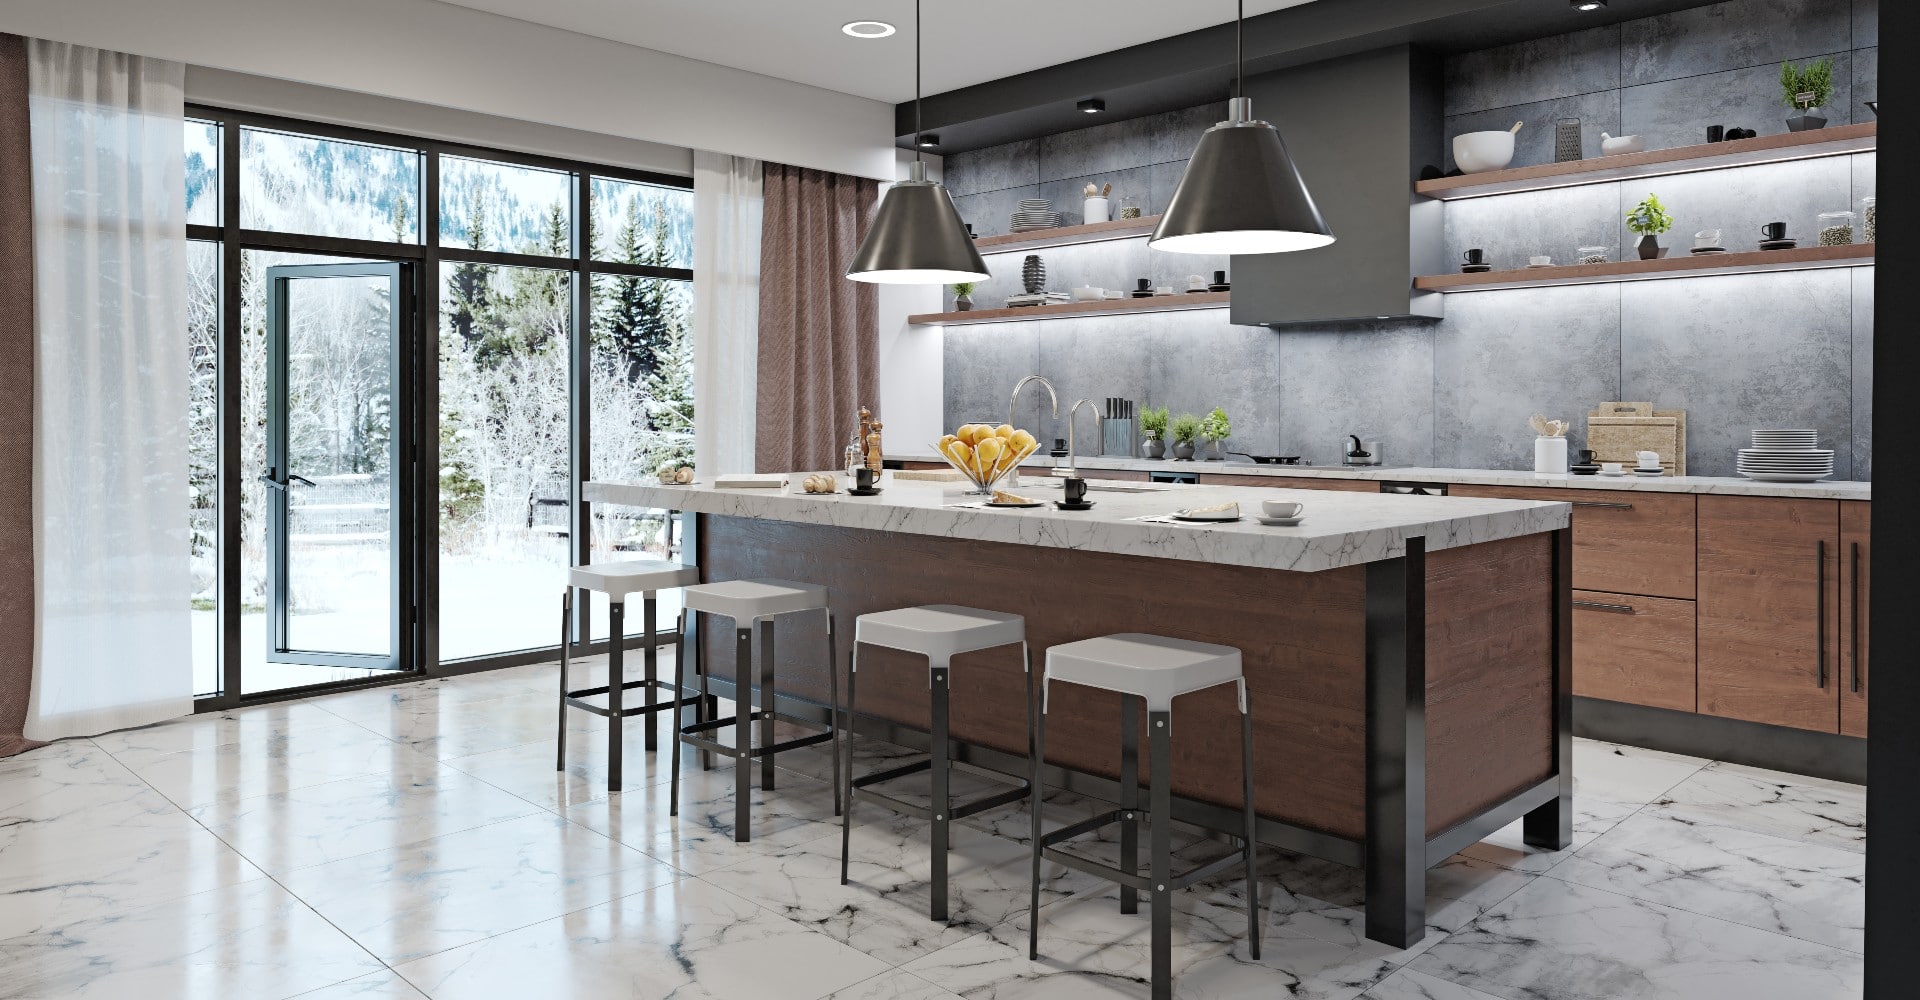 kitchen remodel ideas from kitchen contractors